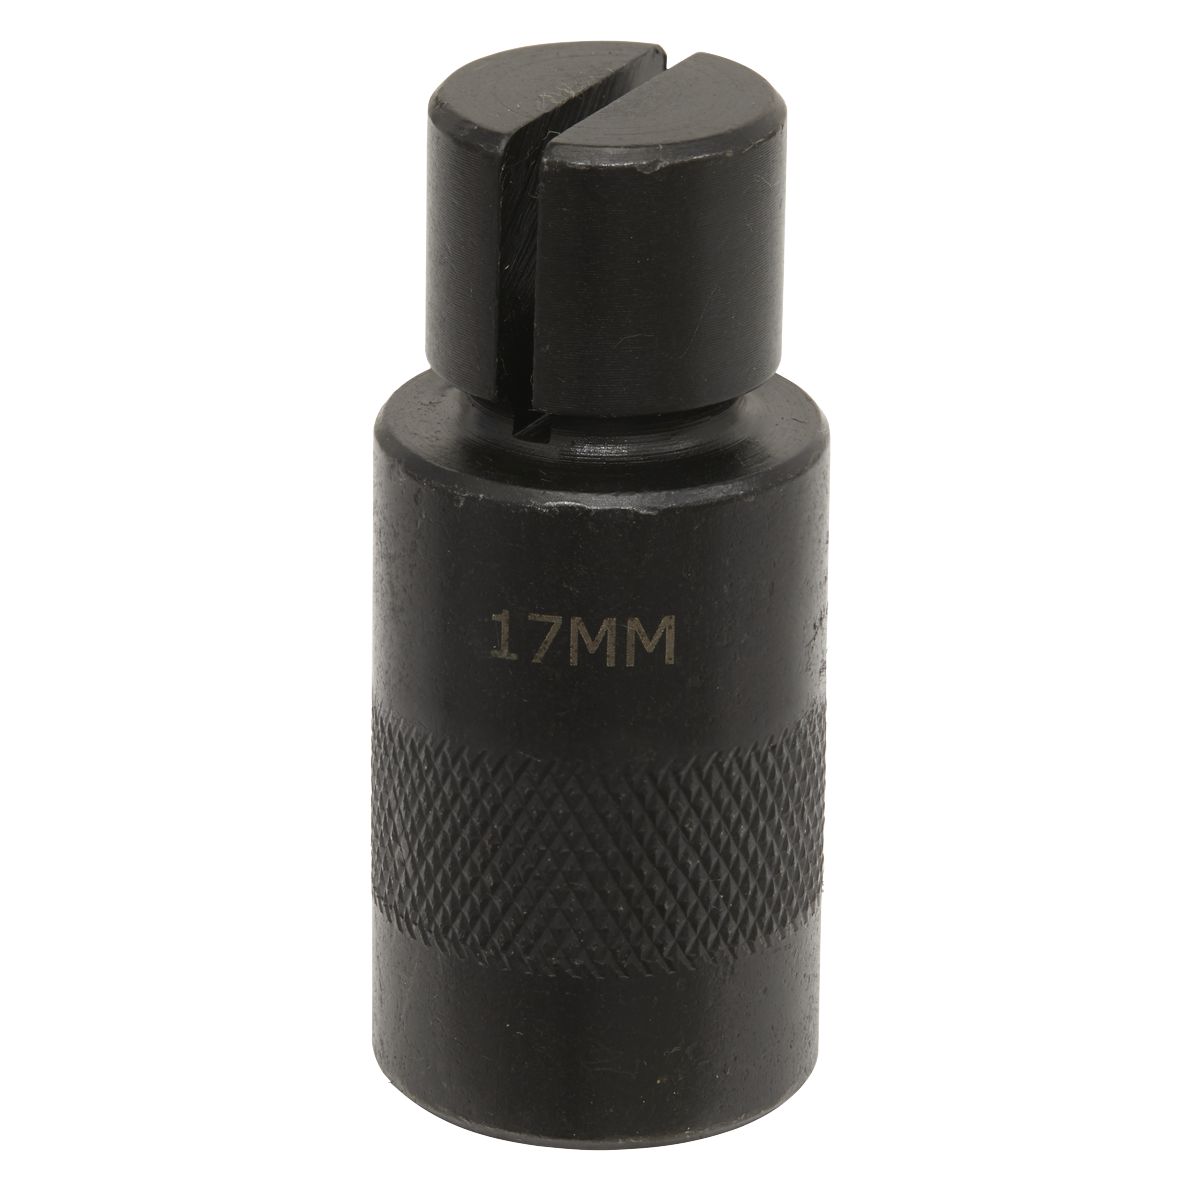 Replacement Collet for MS062 Ø12mm